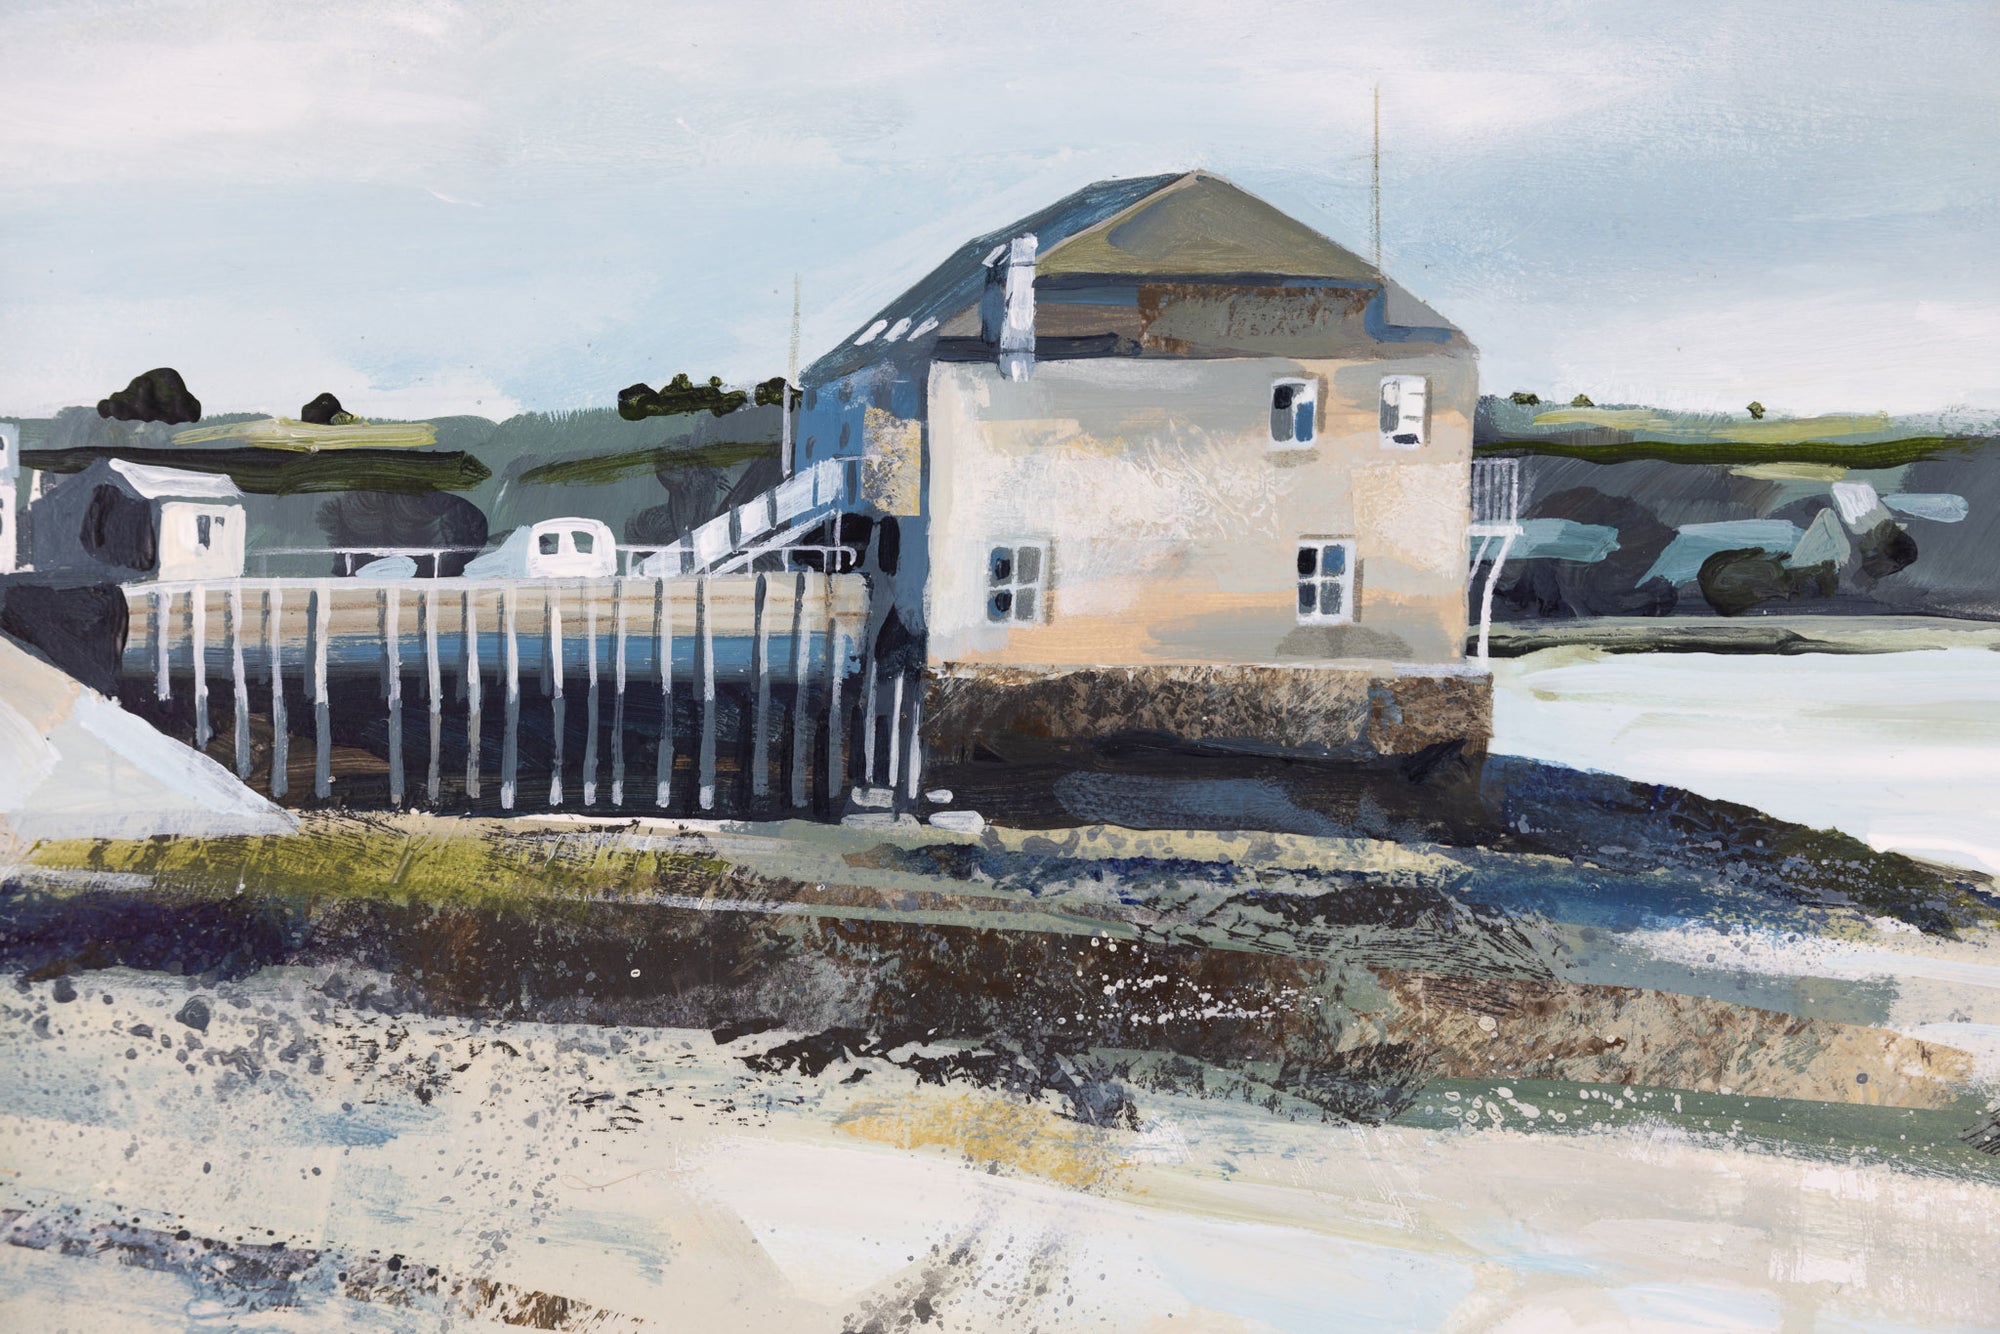 'The Beach at Rock' a mixed media original by Claire Henley, available at Padstow Gallery, Cornwall